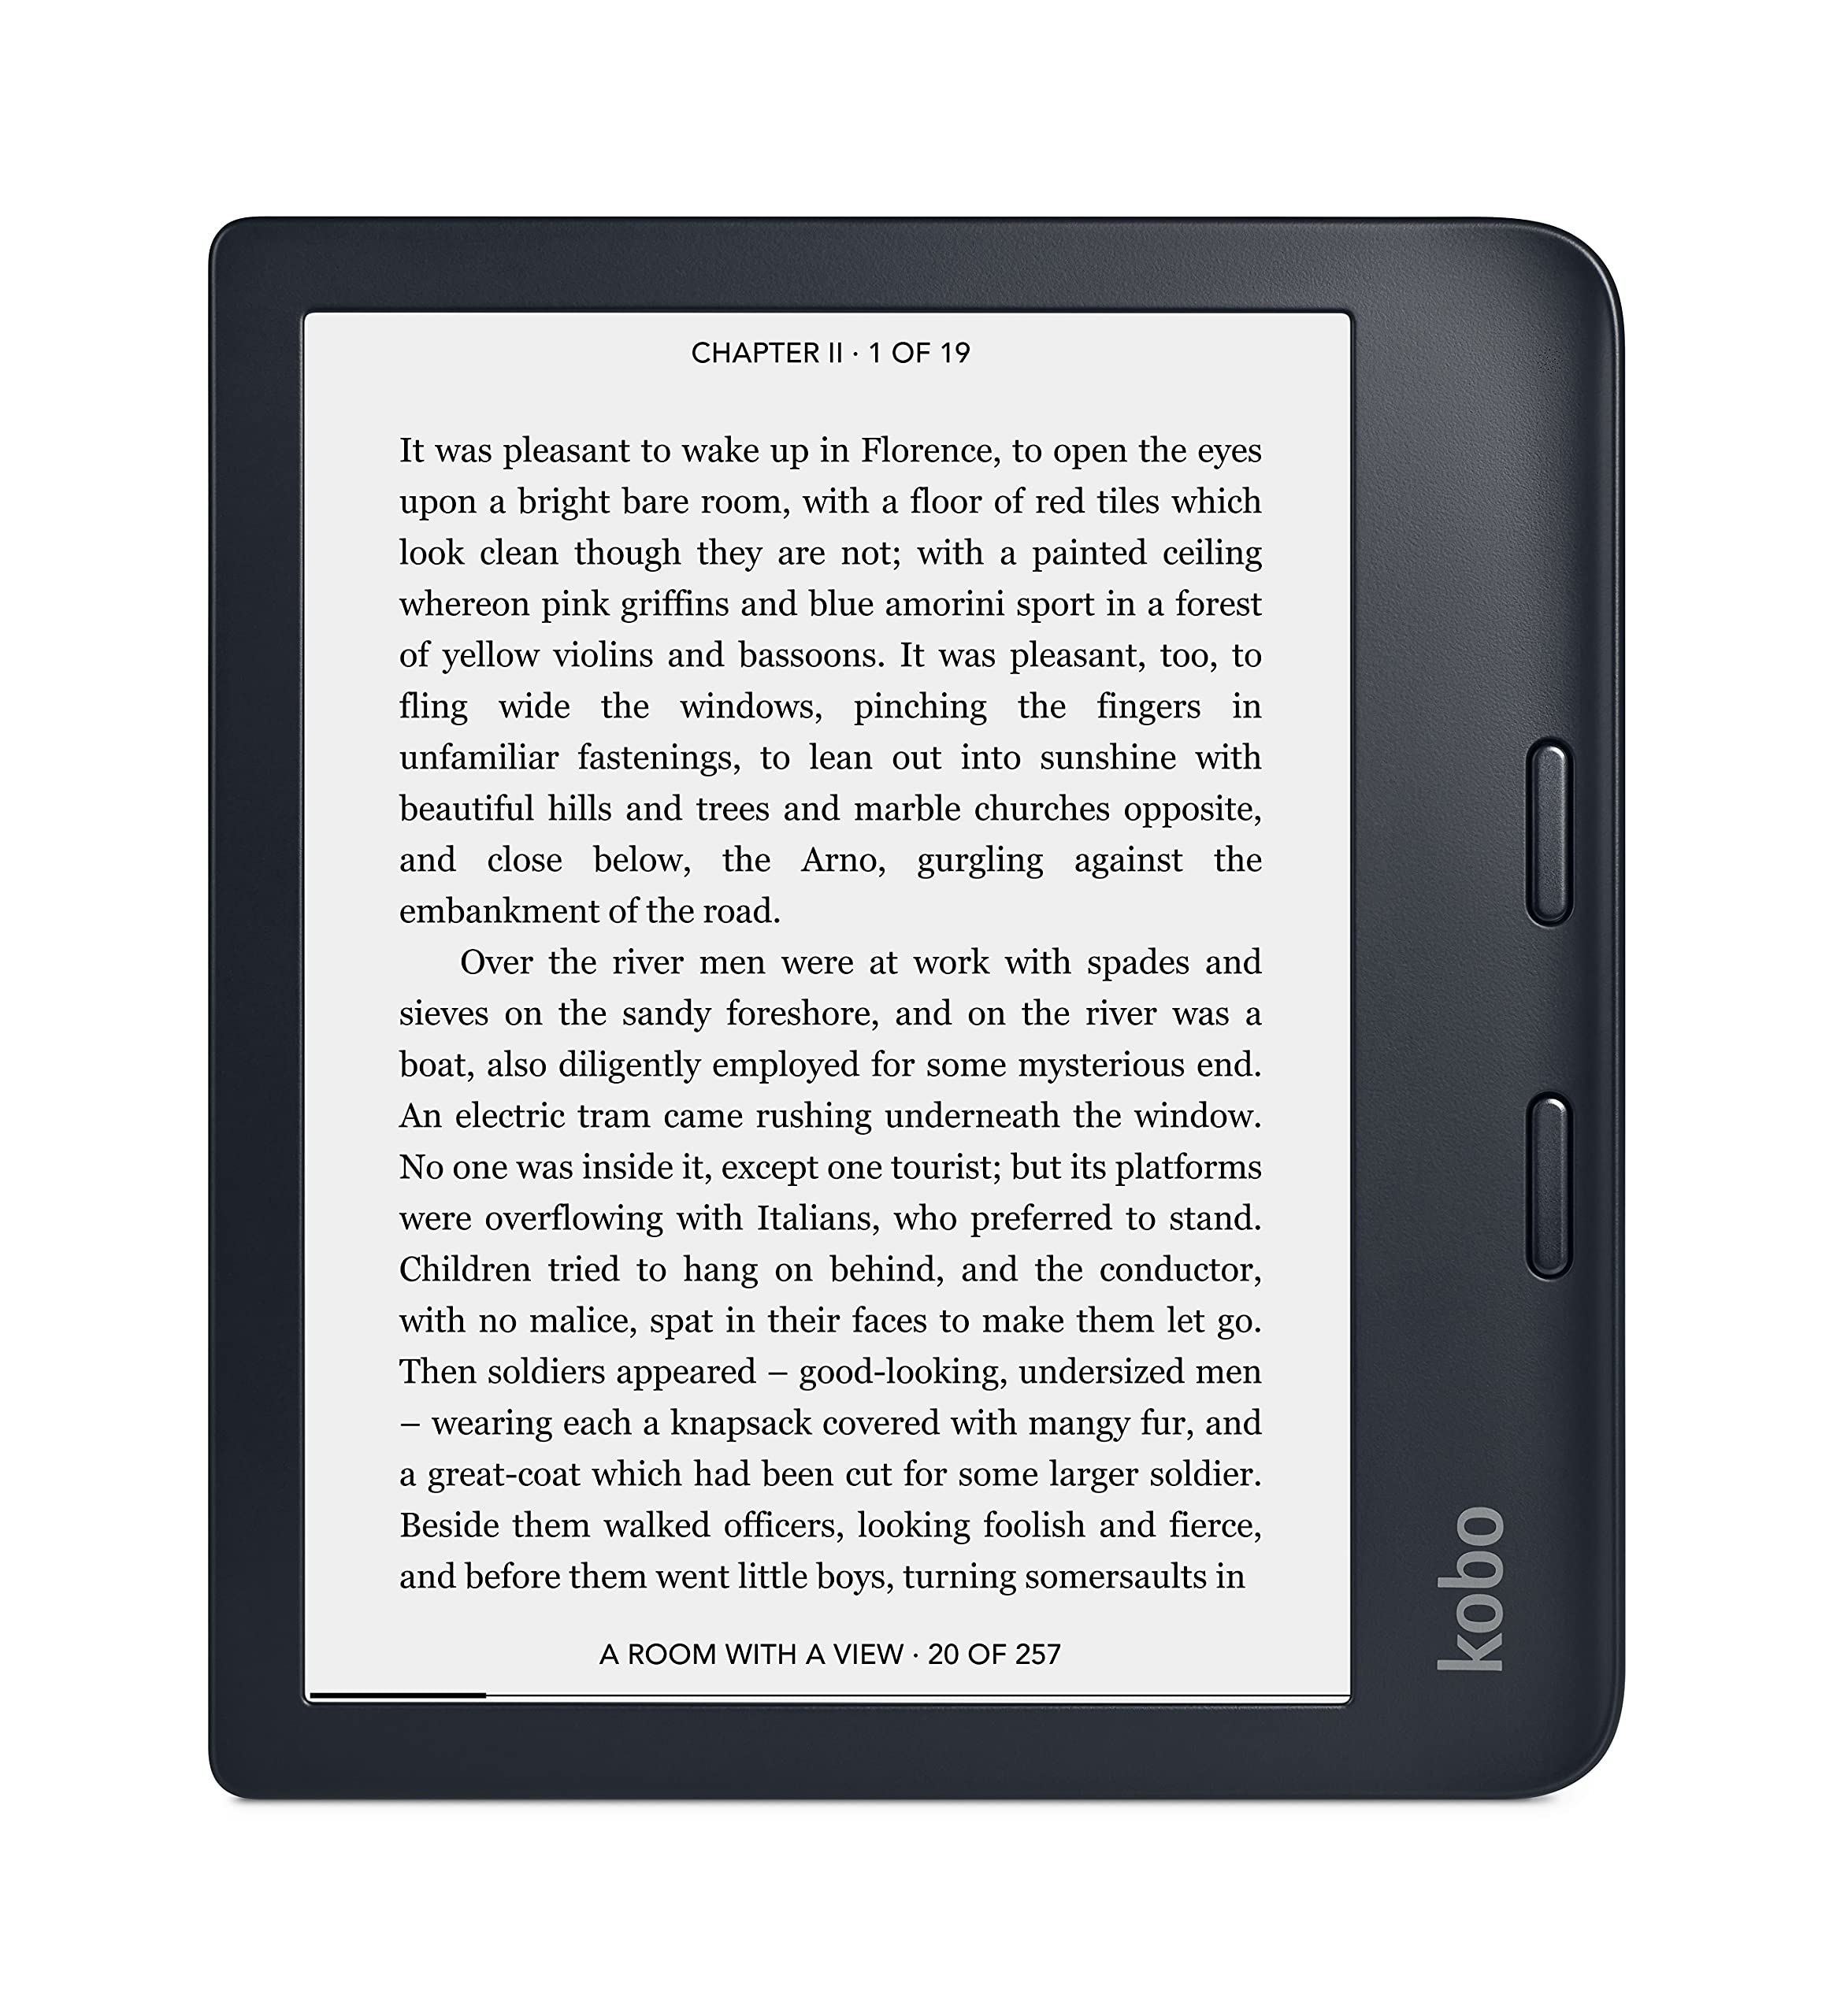 Kobo Libra 2 | eReader | 7? Glare Free Touchscreen | Waterproof | Adjustable Brightness and Color Temperature | Blue Light Reduction | eBooks | WiFi | 32GB of Storage | Carta E Ink Technology | Black - image 1 of 5